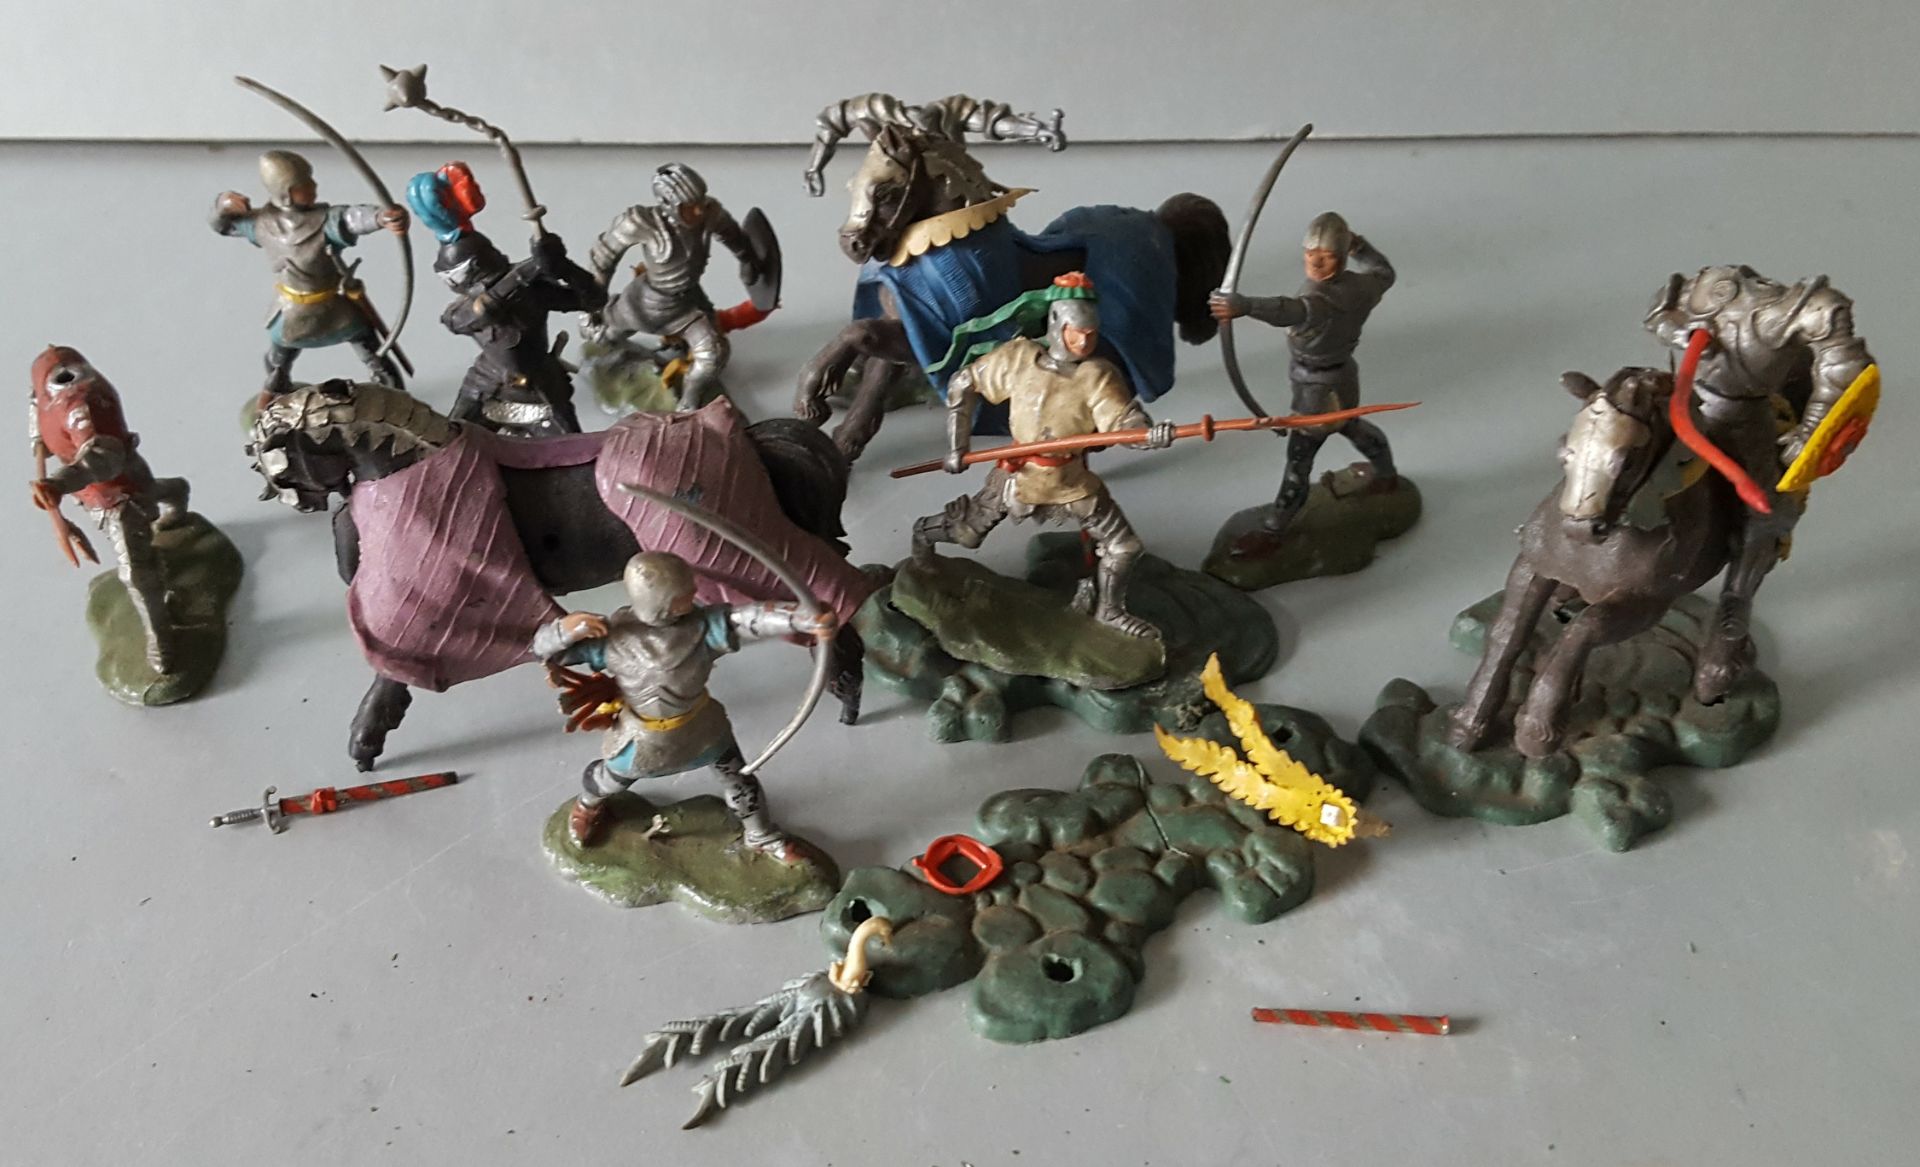 Vintage Retro Collectable Britains Toy Figures War of The Roses - No Reserve